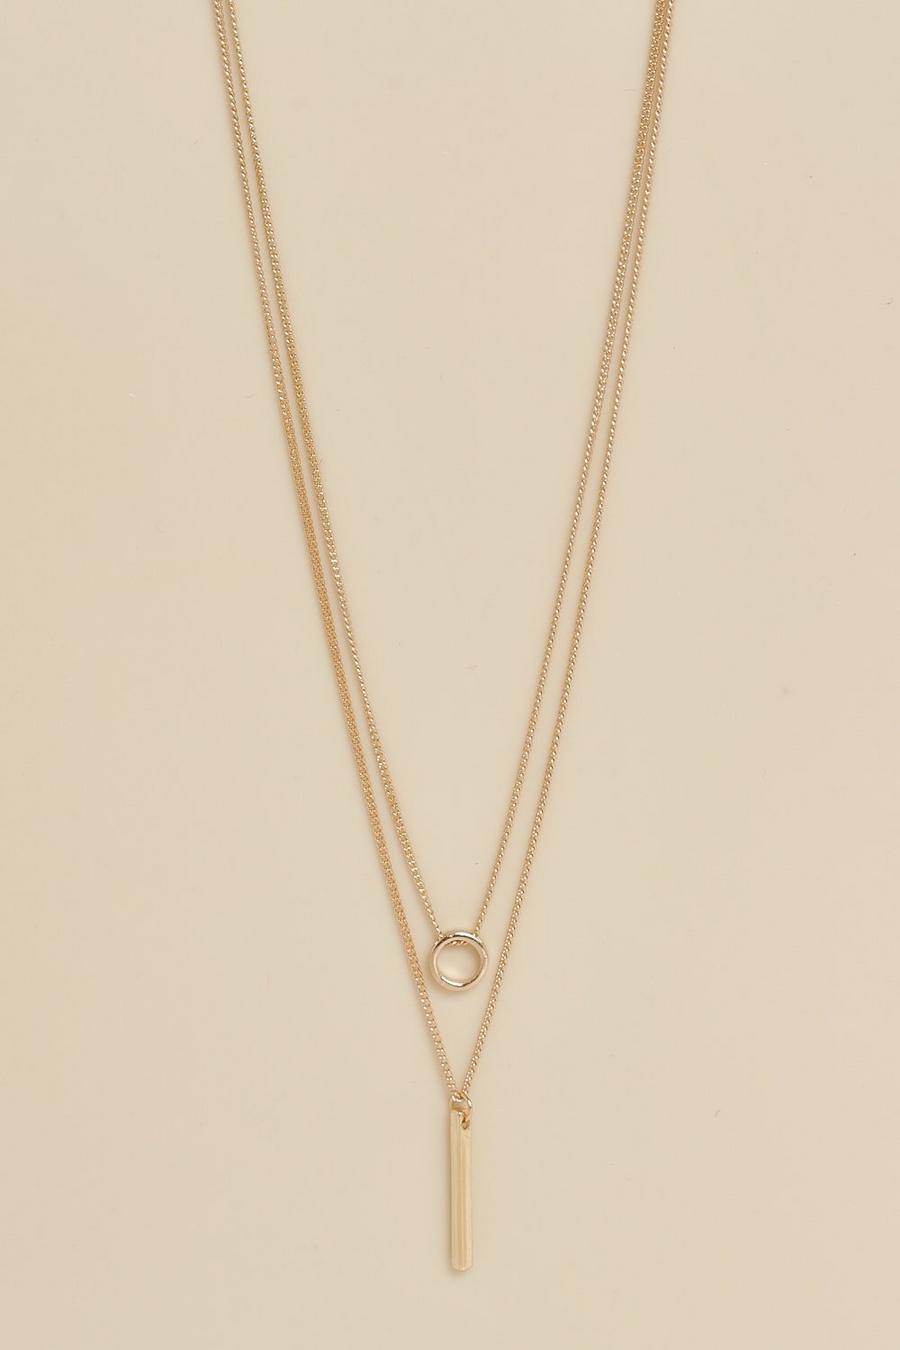 Gold metallic Recycled Circle & Bar Simple Layered Necklace